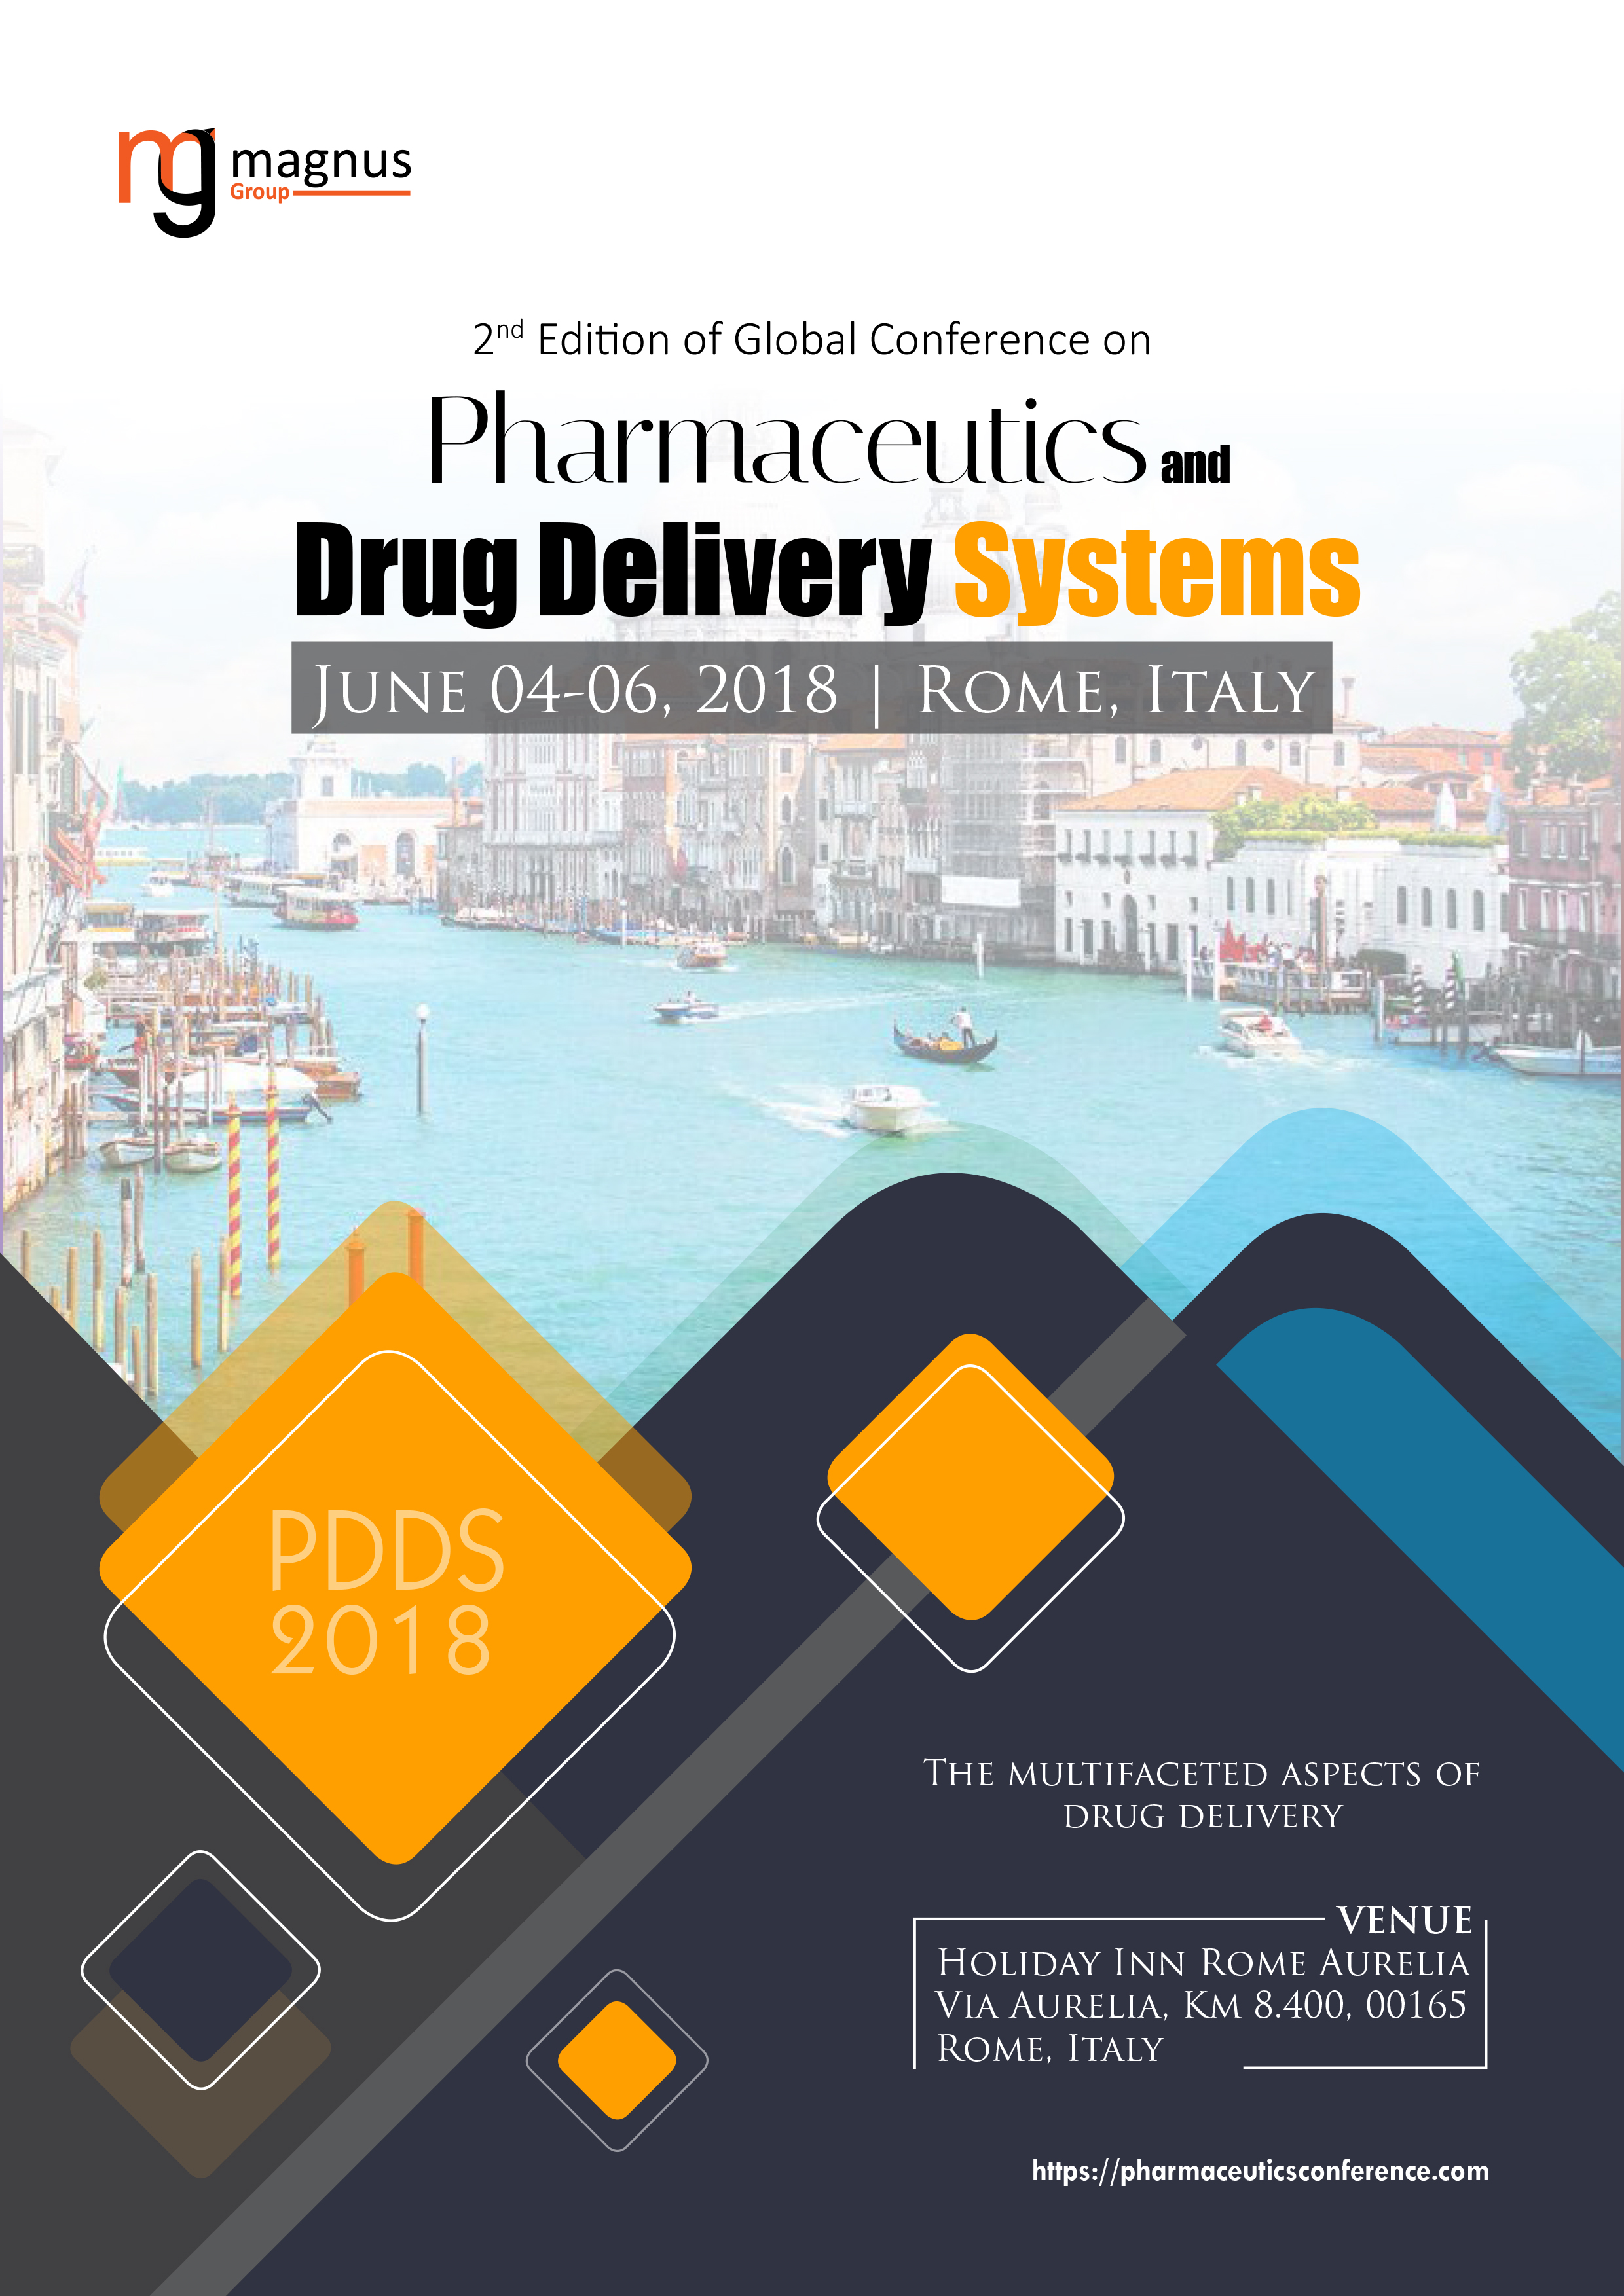 2nd Edition of Global Conference on Pharmaceutics and Drug Delivery Systems | Rome, Italy Book